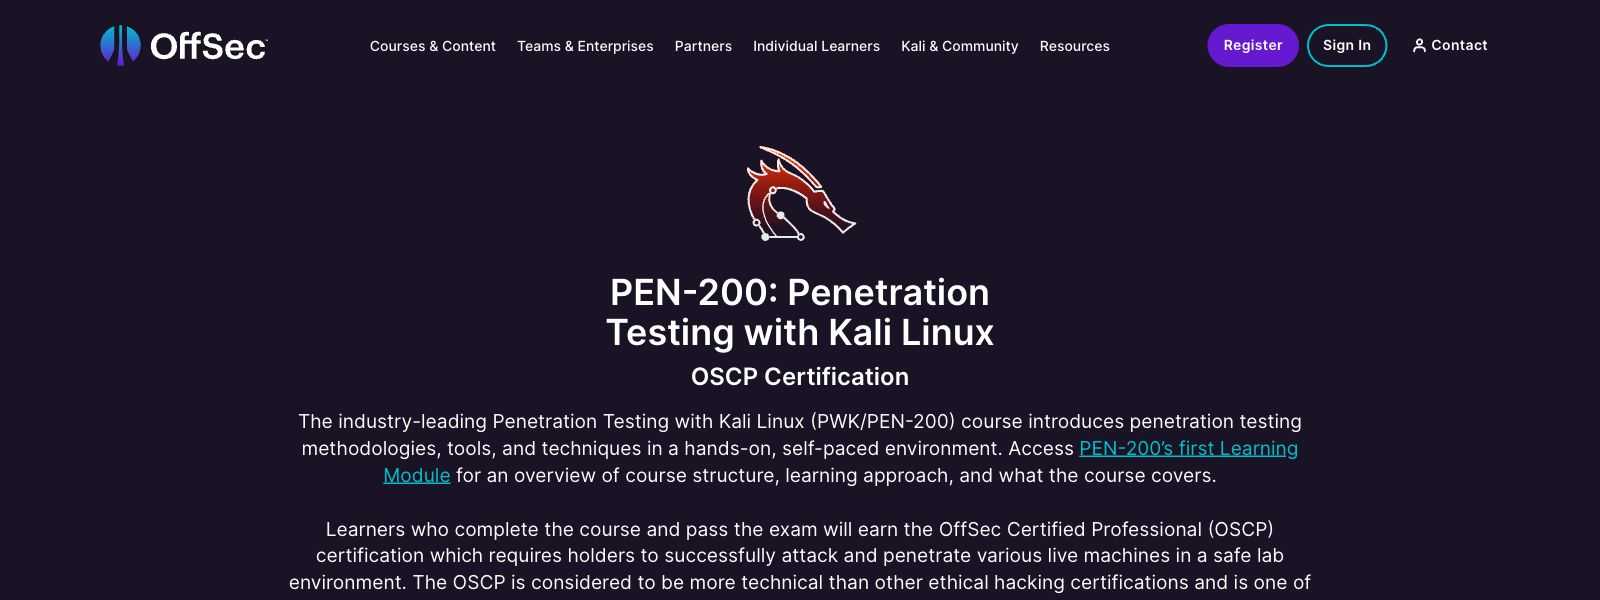 OSCP PEN-200: Penetration Testing with Kali Linux